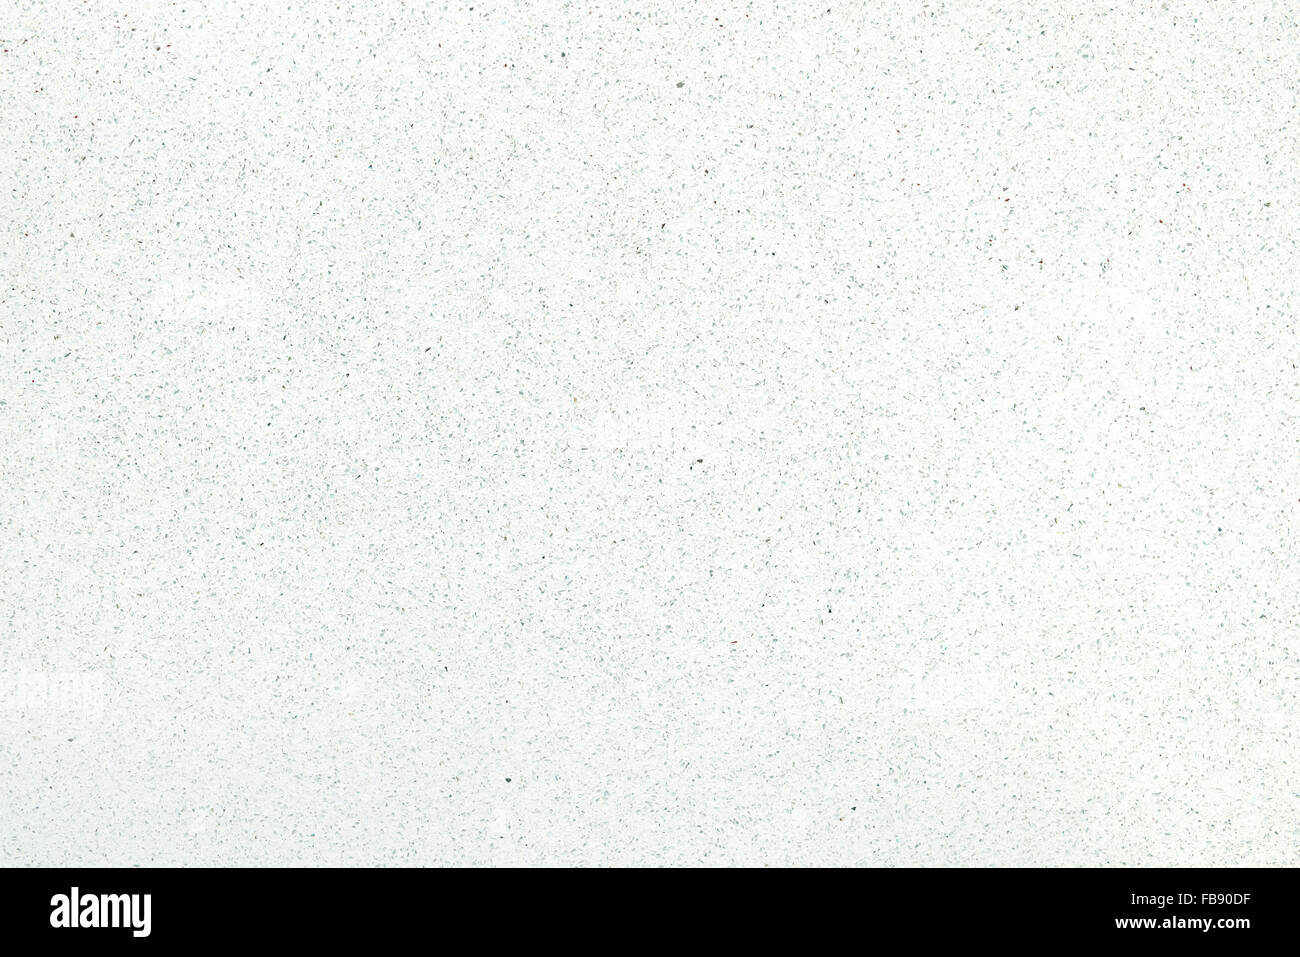 Quartz surface for bathroom or kitchen white countertop. High resolution texture and pattern. Stock Photo